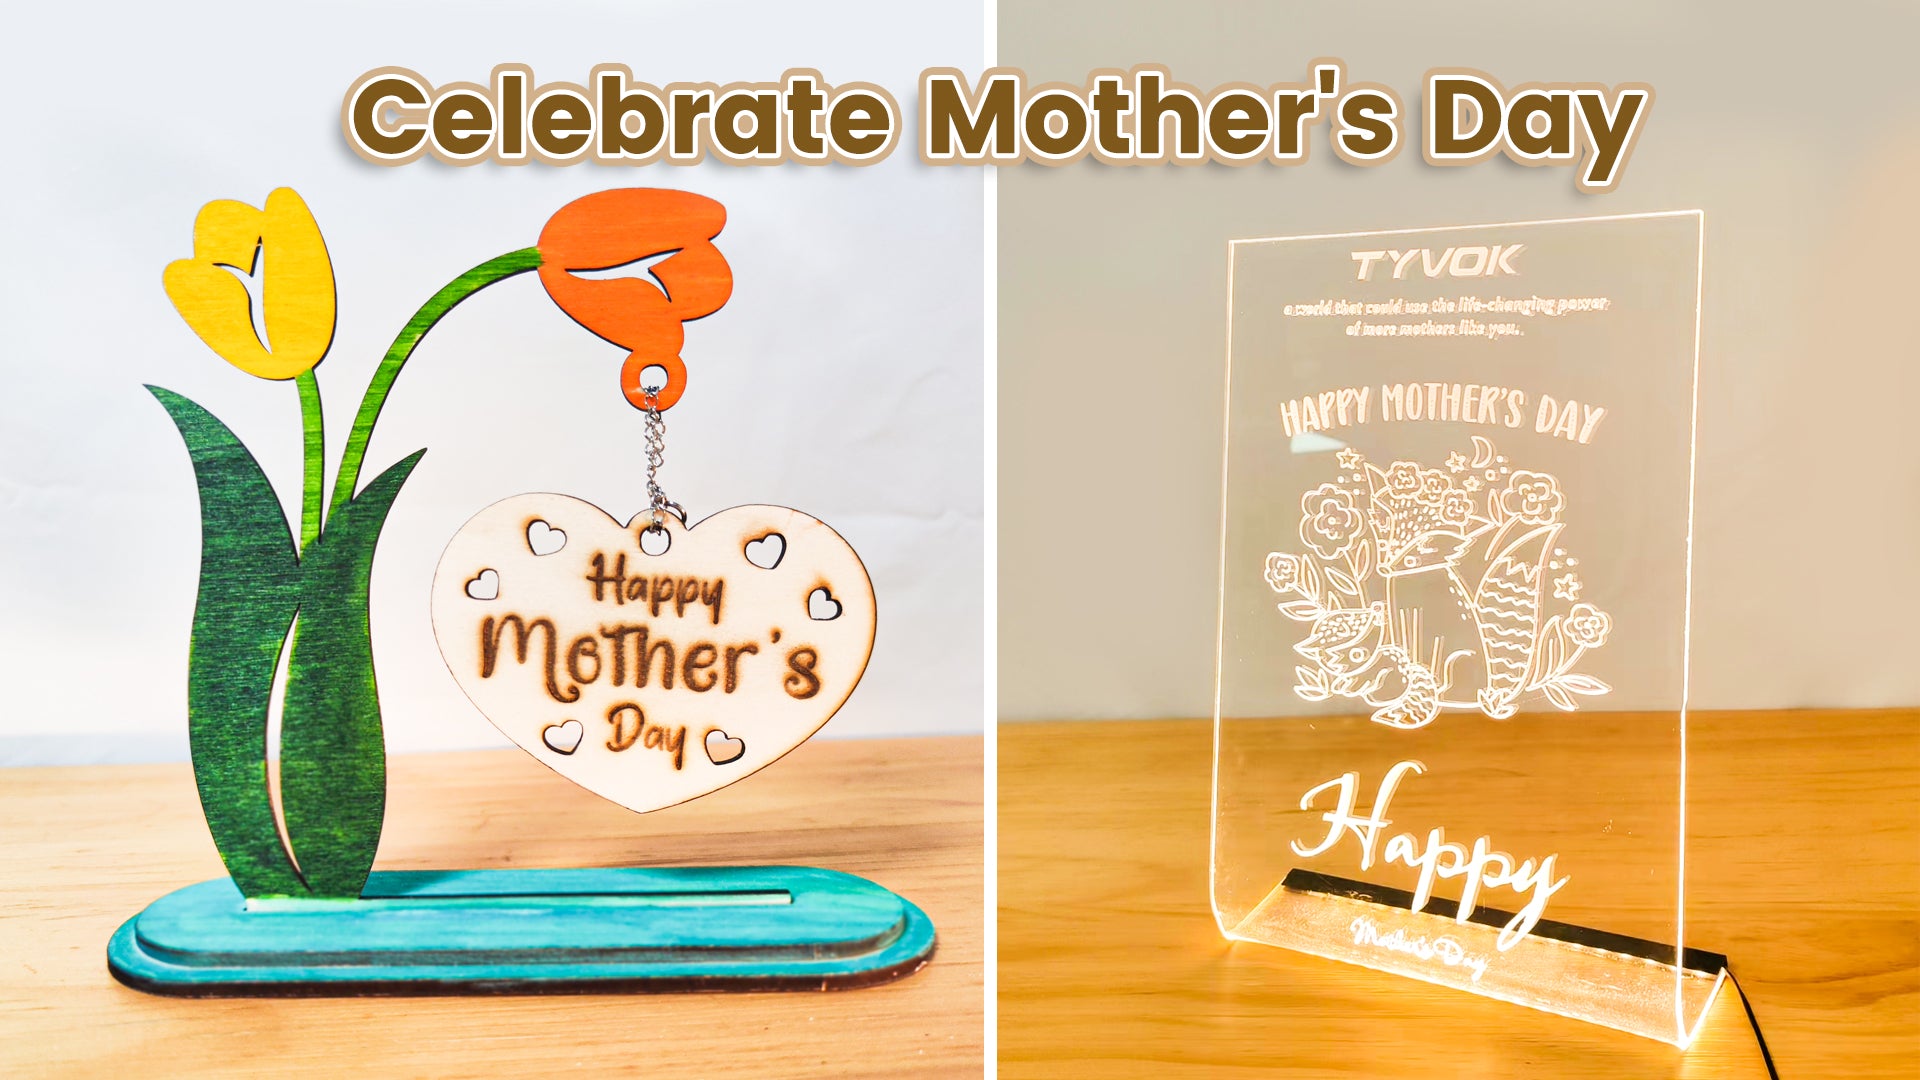 Celebrate Mother's Day with Special Gifts and Personalized Wishes!